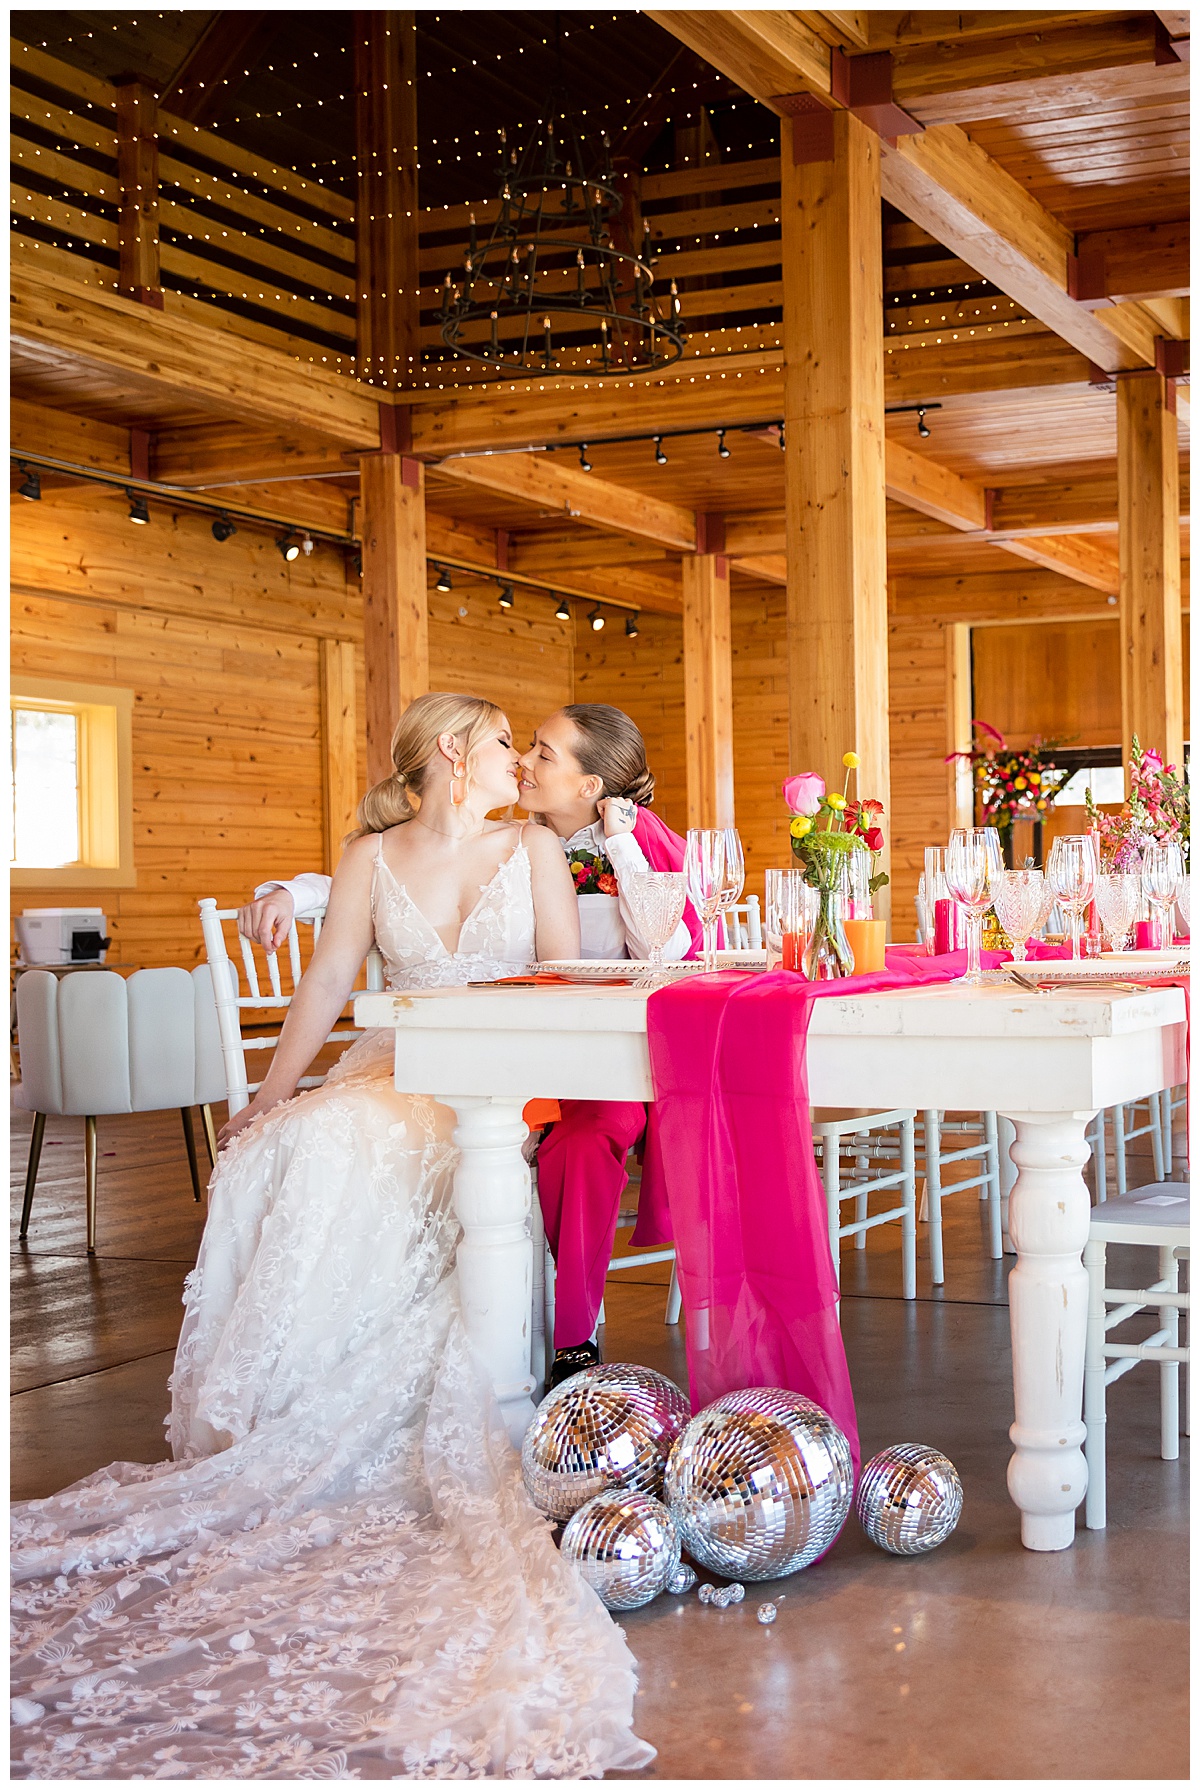 The brides sit at the spring wedding inspiration table with flowers and a hot pink runner. The wood barn is the background, with twinkle lights and a chandelier.